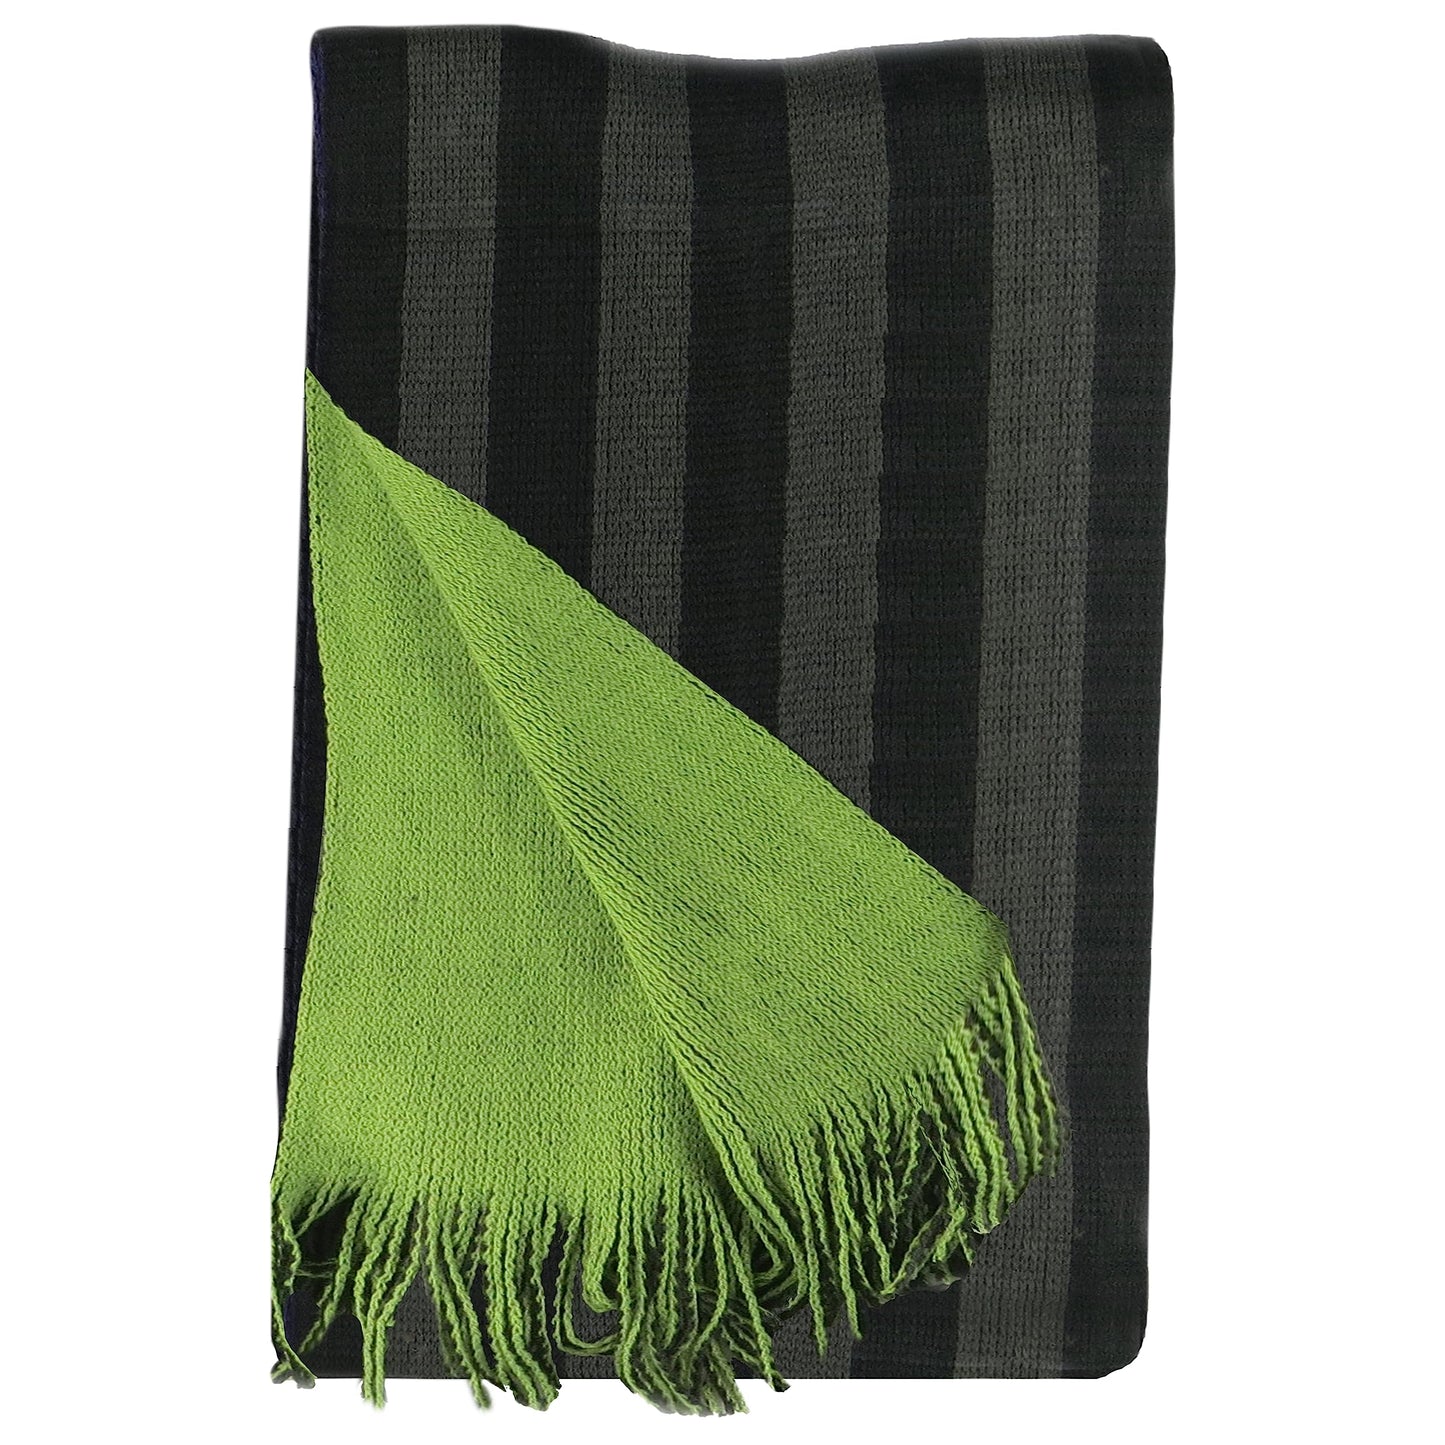 Men's Scarves In 3 Colours Reversible Stripe Design Soft Woven Scarf. Buy now for £7.00. A Scarves by Sock Stack. accessories, accessory, black, casual, comfortable, green, grey, Men, mens, One Size, outdoor, purple, Reversible, Scarf, Scarfs, Scarves, st